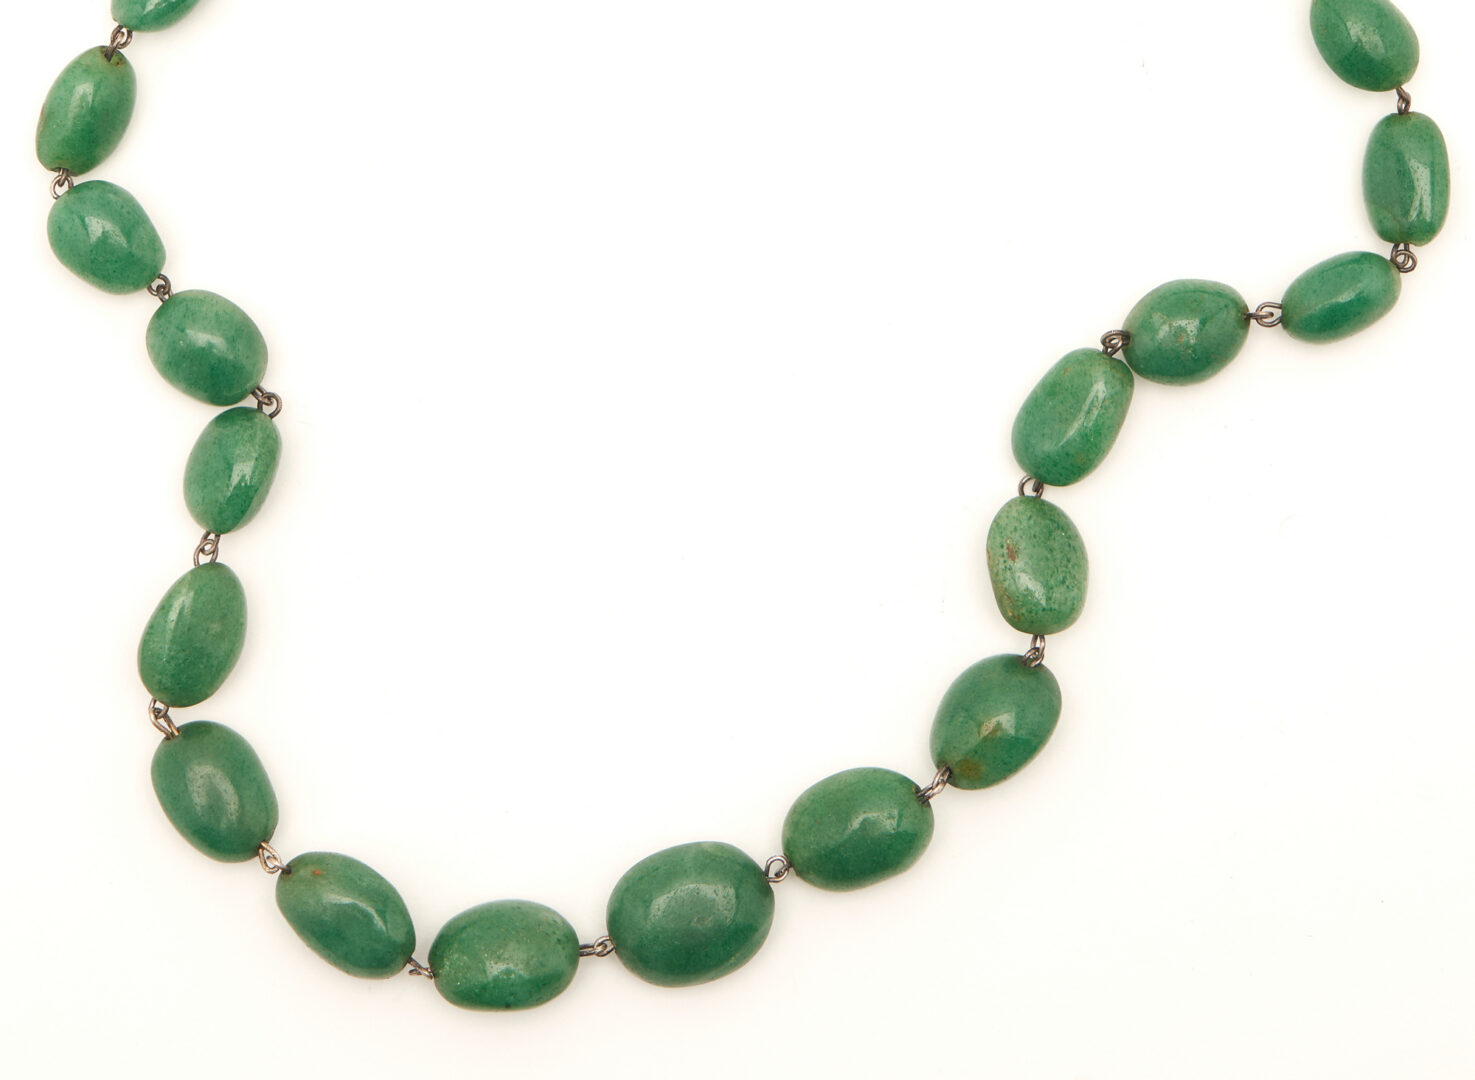 Lot 46: Three Chinese Jade Necklaces